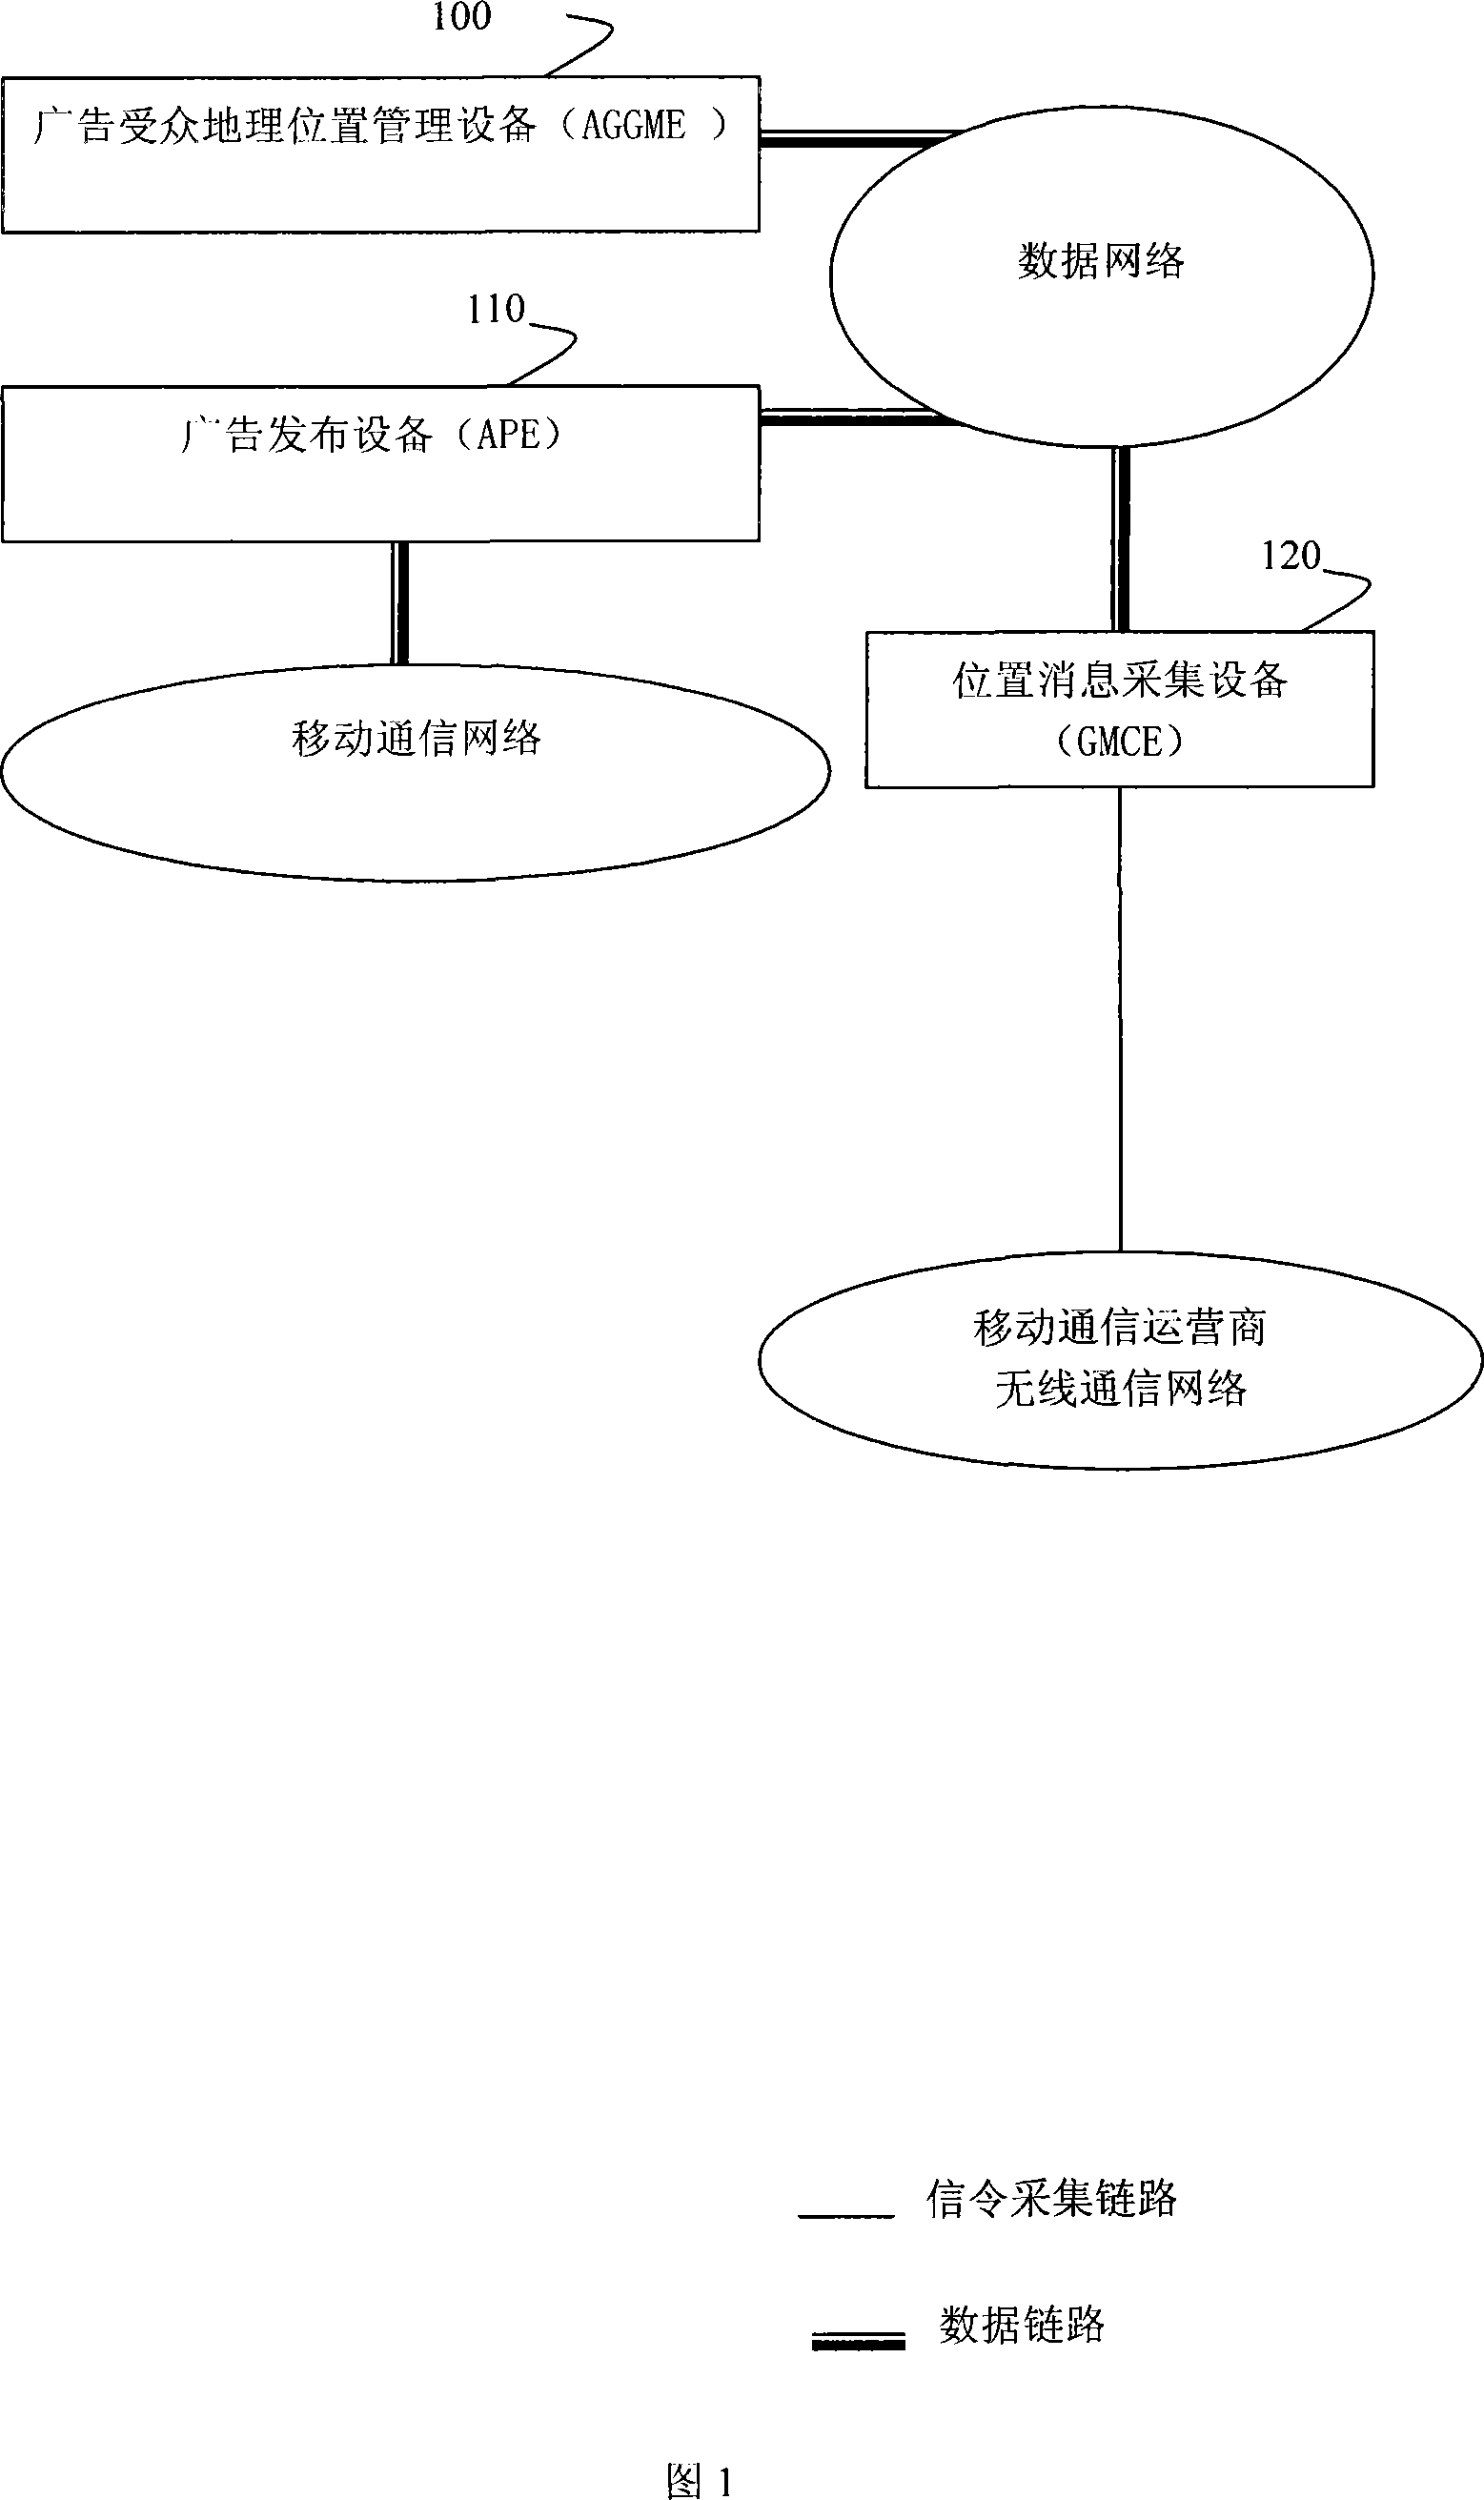 System and method for selecting advertisement audience according to wireless overlay area